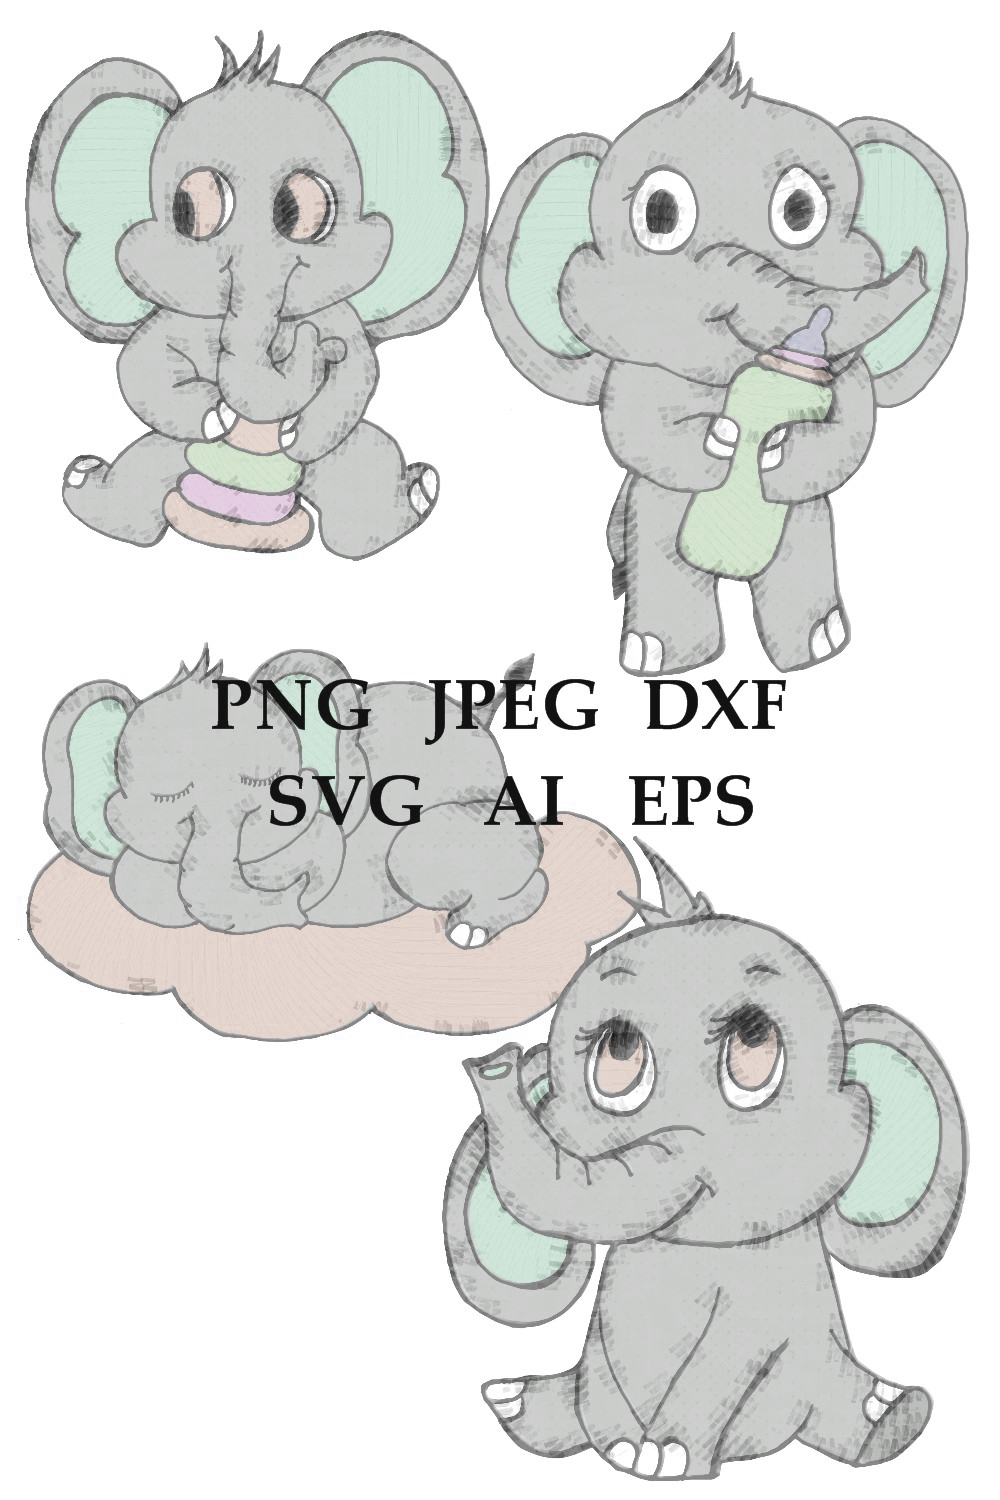 Cute Chalky Elephant Sticker Baby Set For Baby Room Pinterest Image.